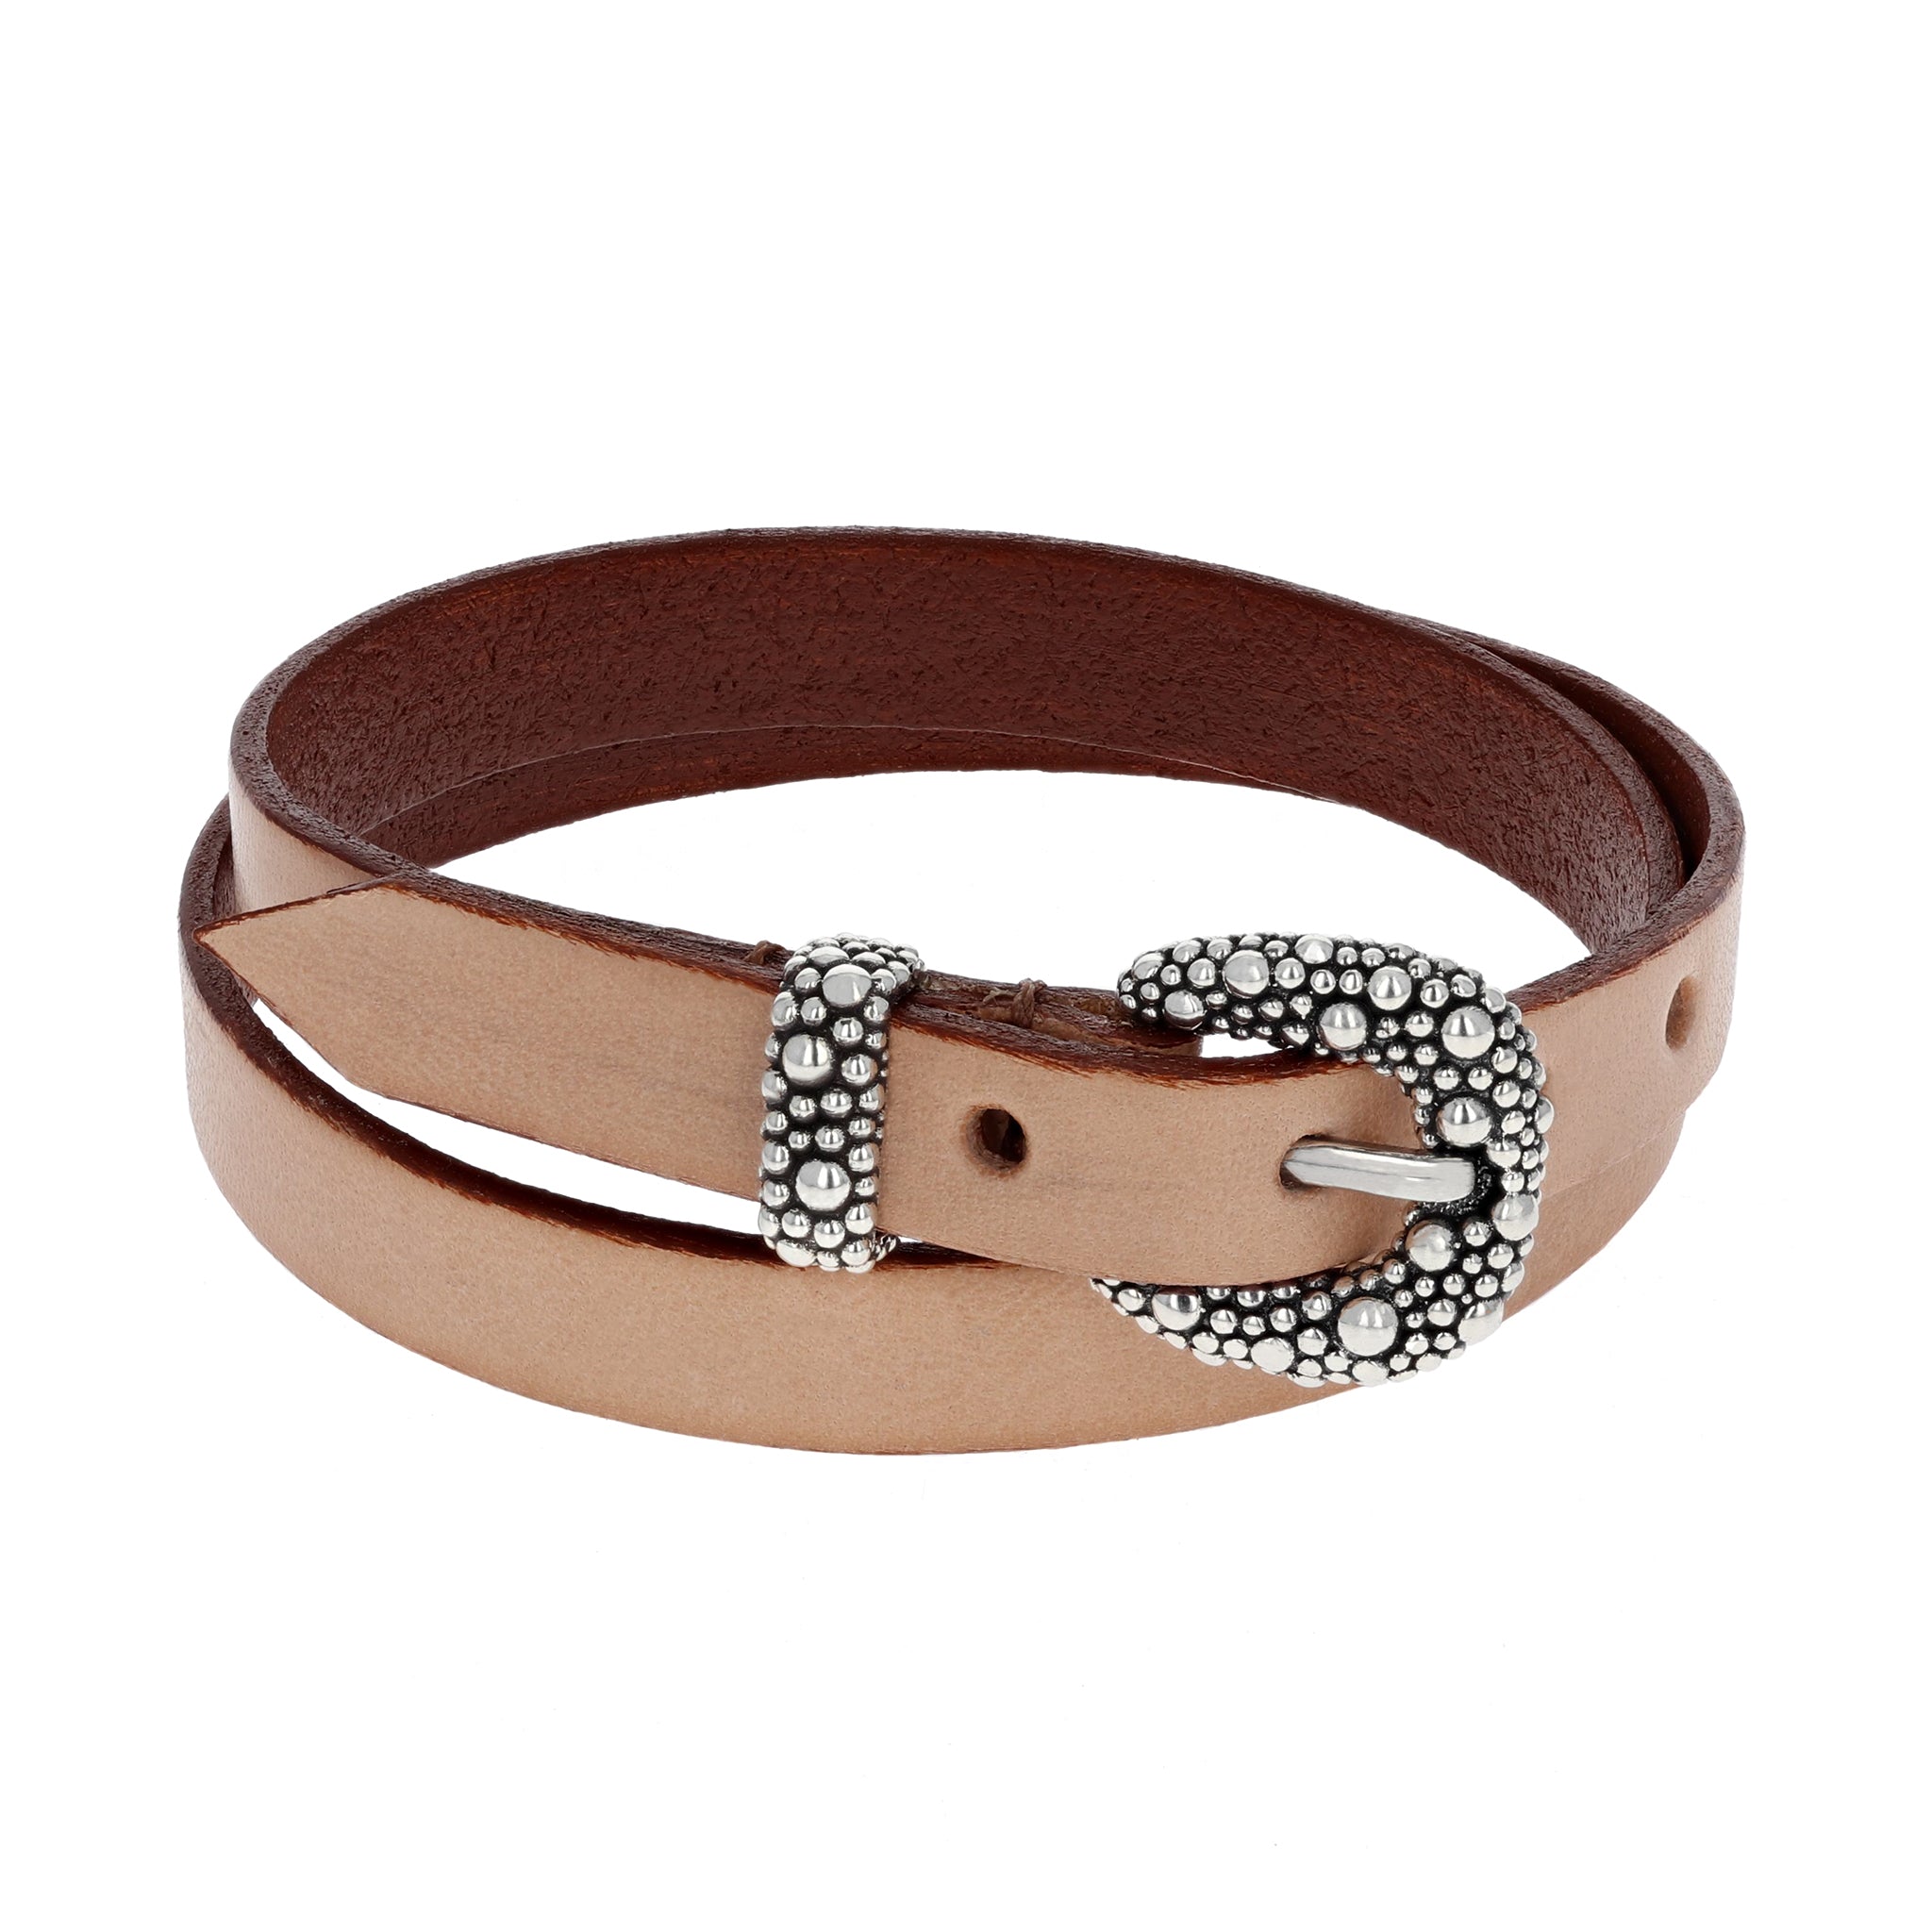 Brown Double Wrap Leather Bracelet with Silver Stingray Texture Buckle and Keeper